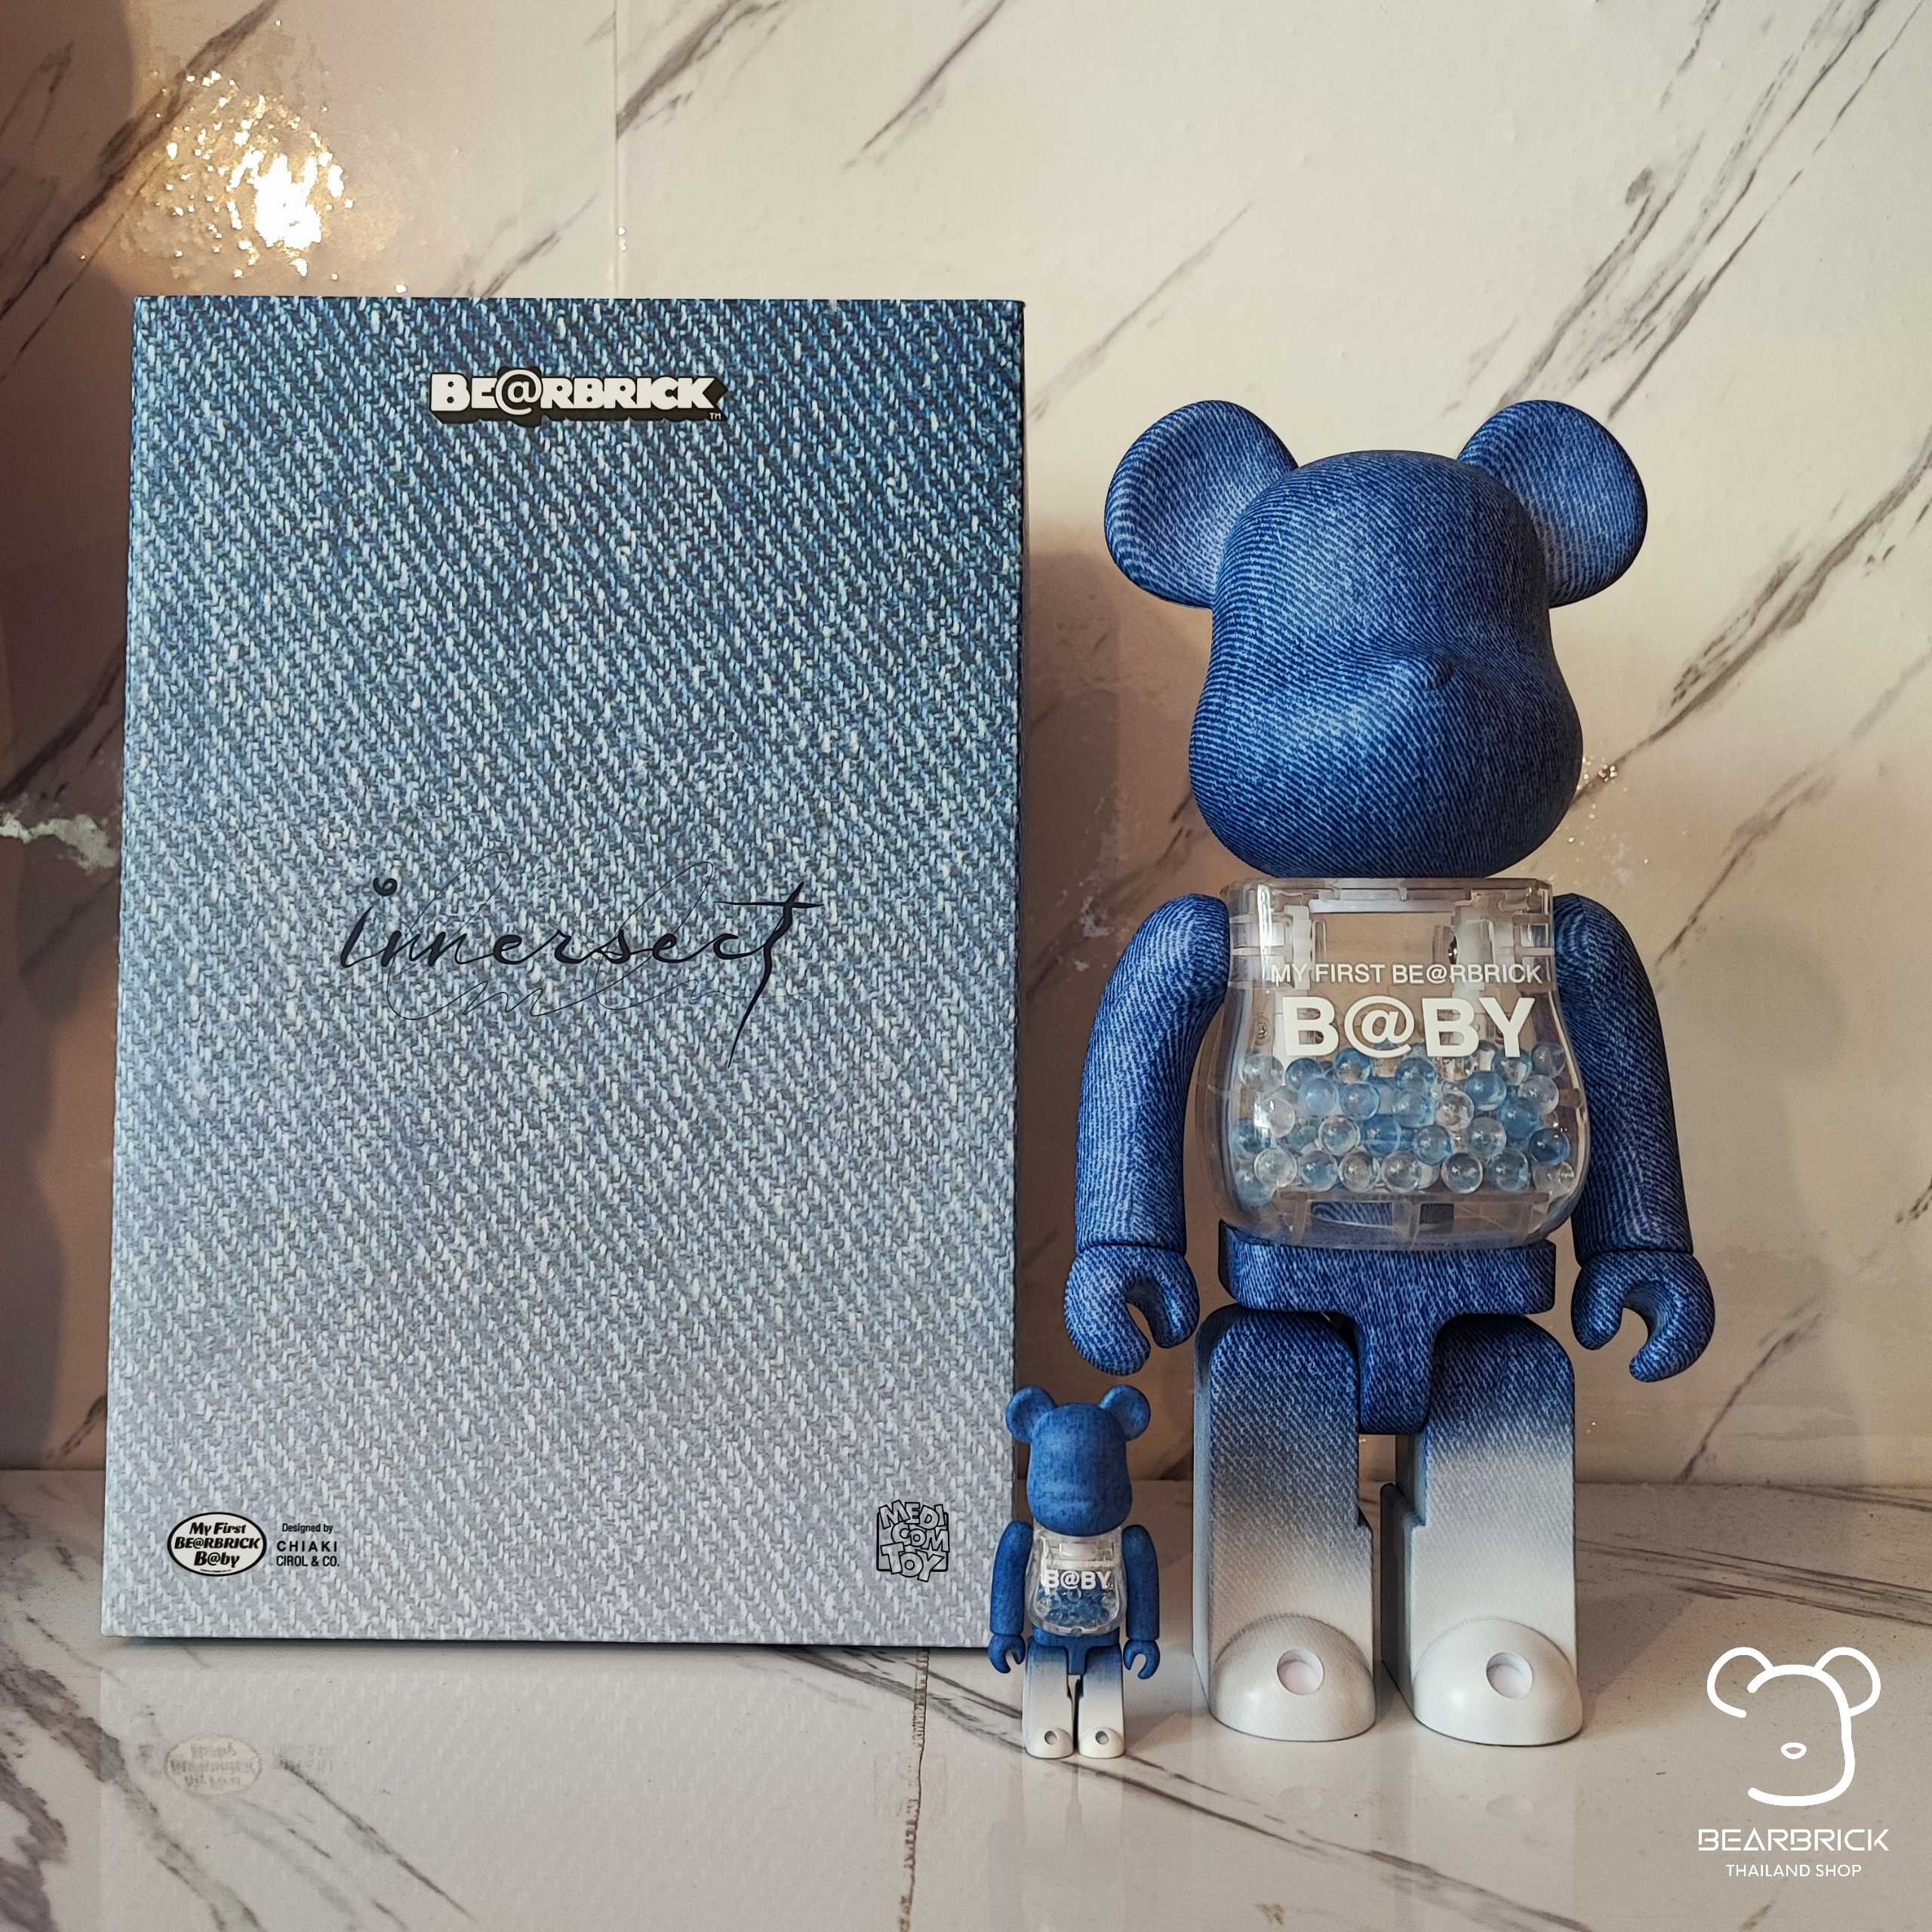 MY FIRST BE@RBRICK INNERSECT 2021 100%&400% - おもちゃ